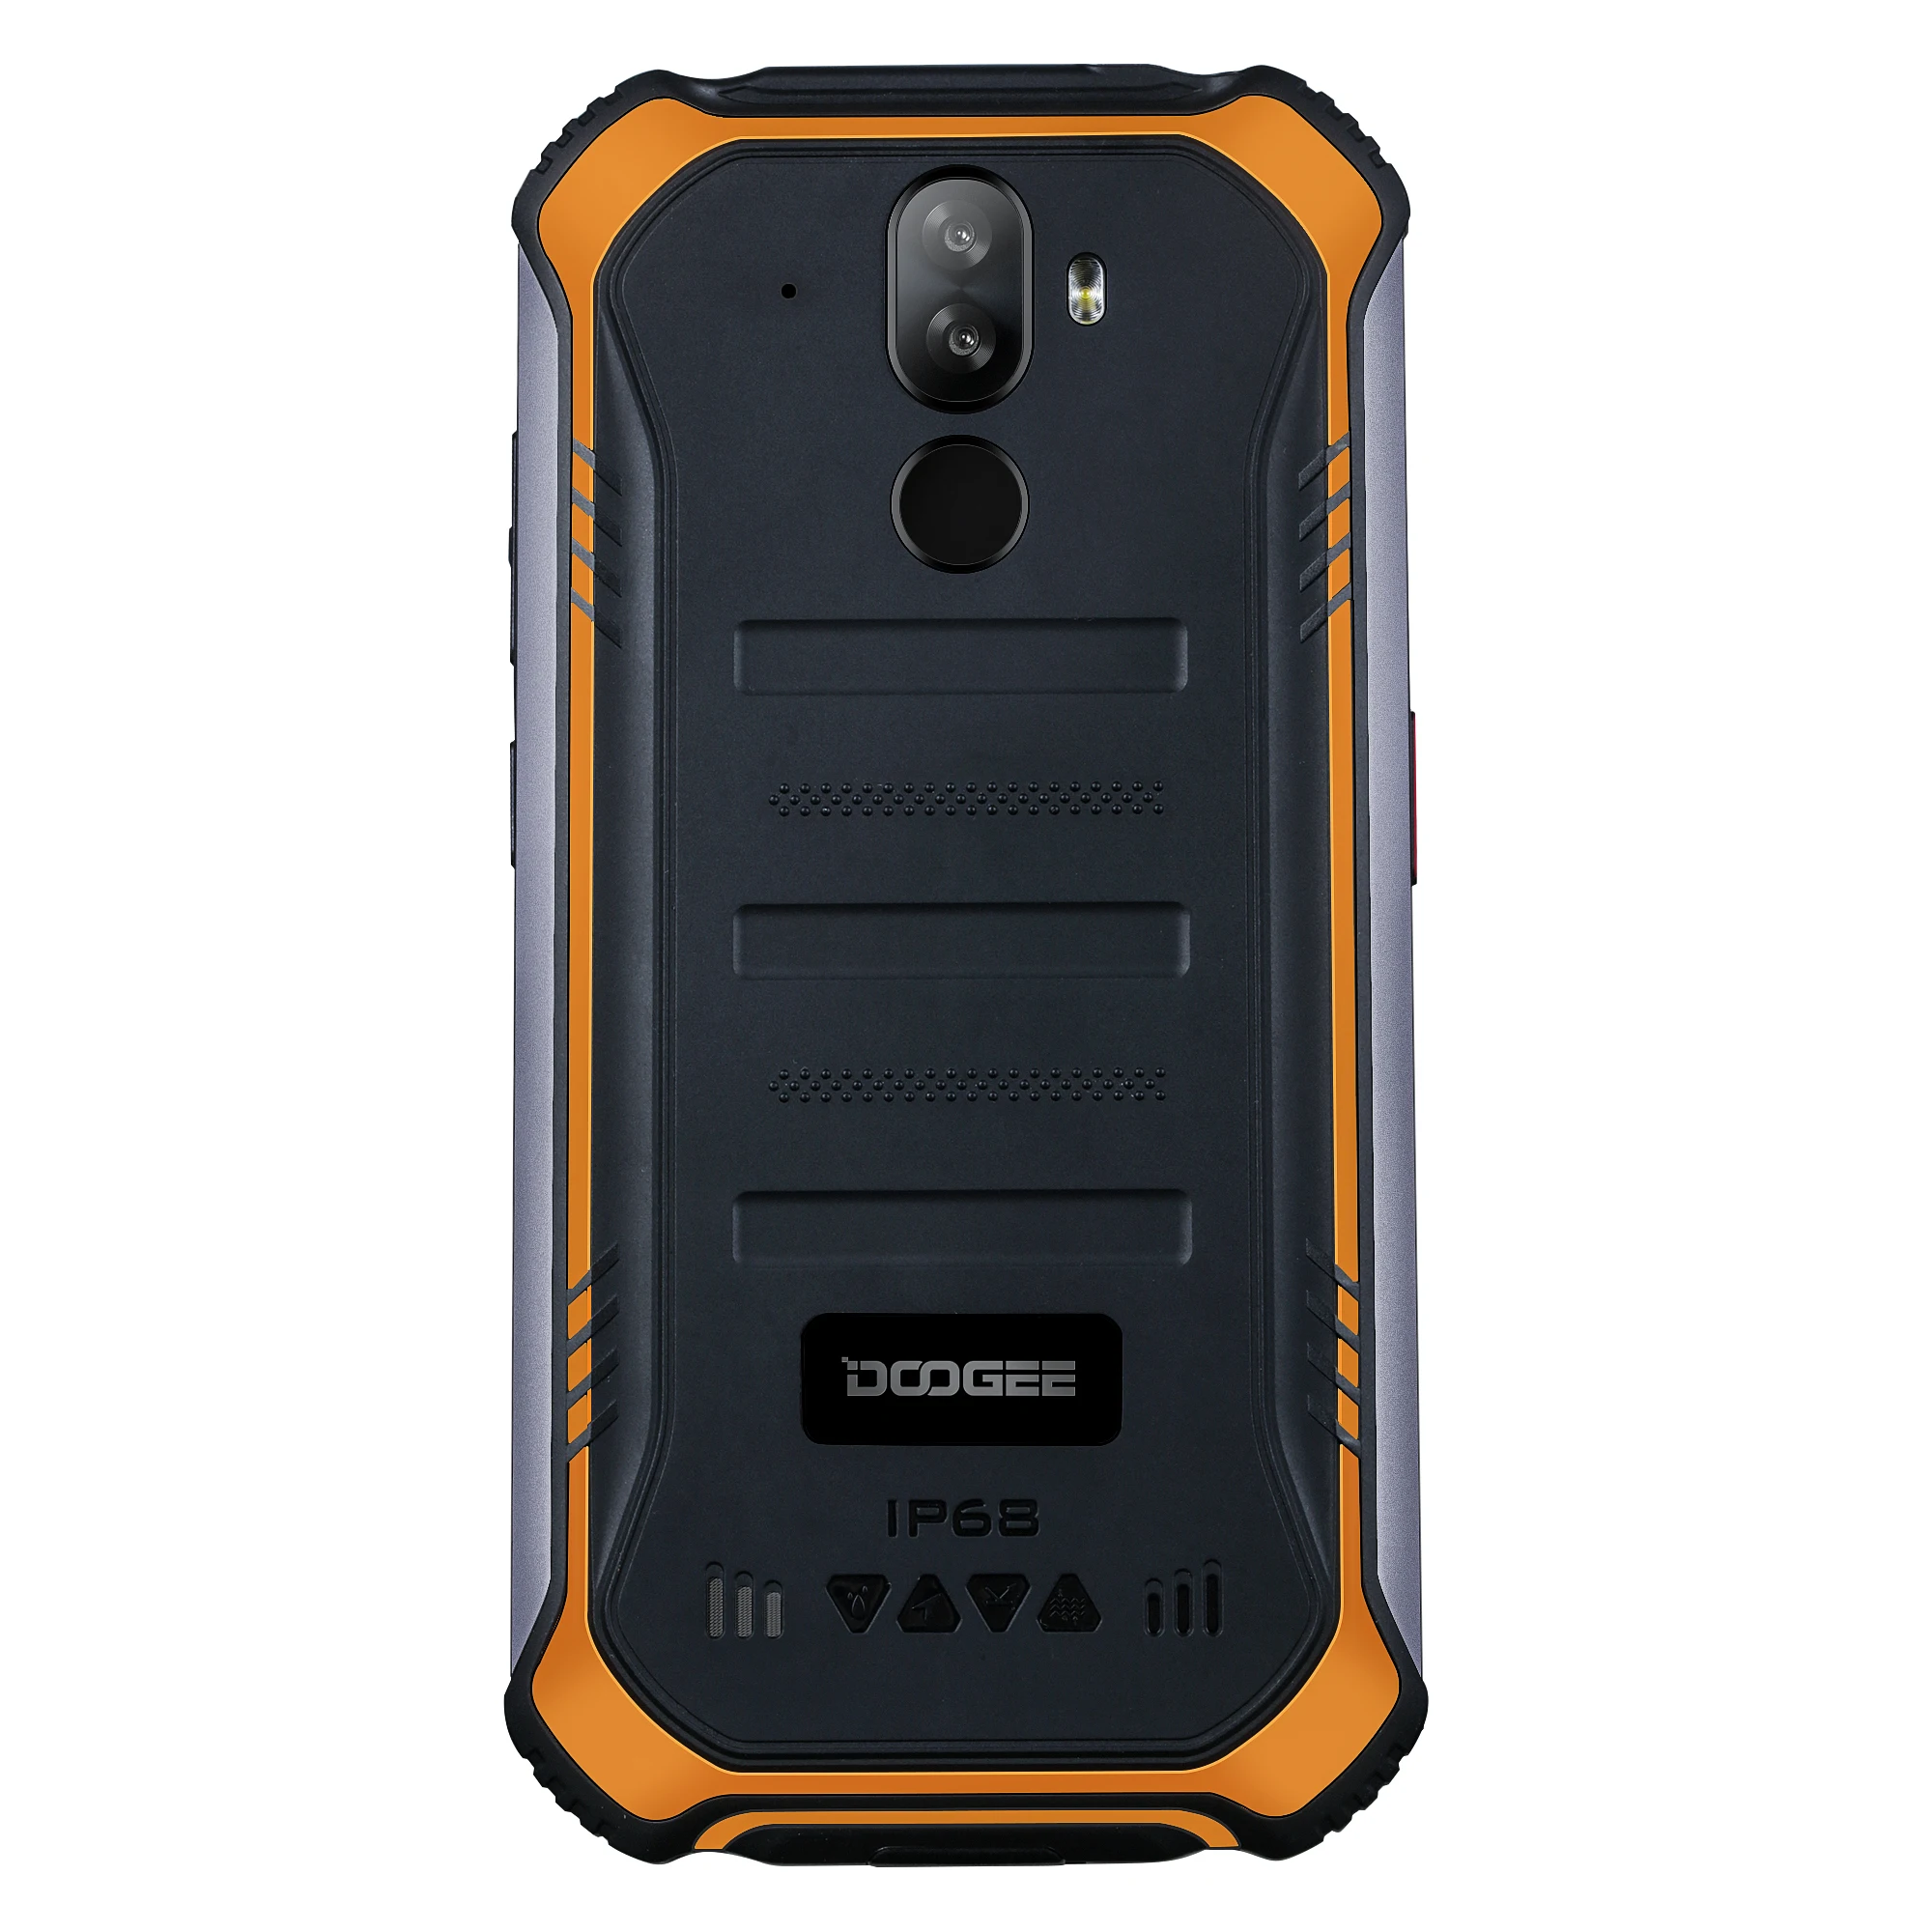  DOOGEE S40 Android 9.0 4G Network Rugged Mobile Phone 5.5inch Cell Phone MT6739 Quad Core 3GB RAM 3 - 33040298941